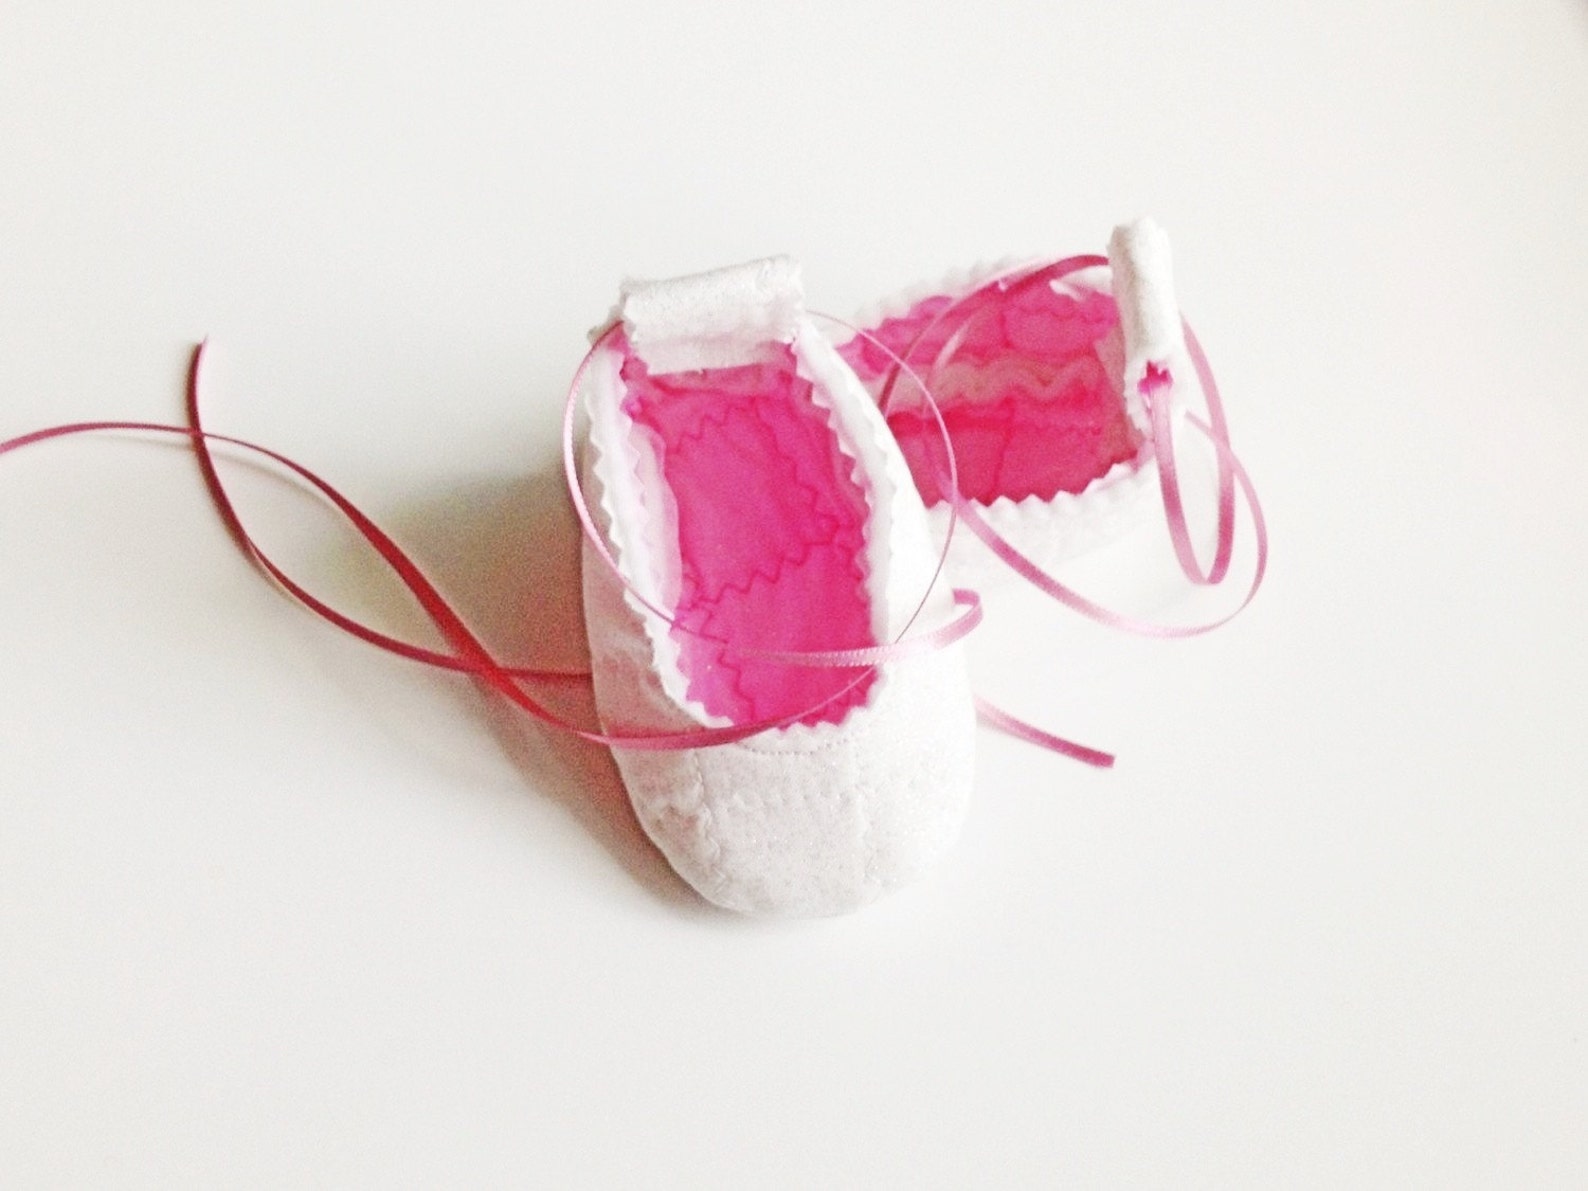 white sparkly baby ballerina slippers with pink sparkly lining, tie up the legs like real ballet flats, great baby gift!